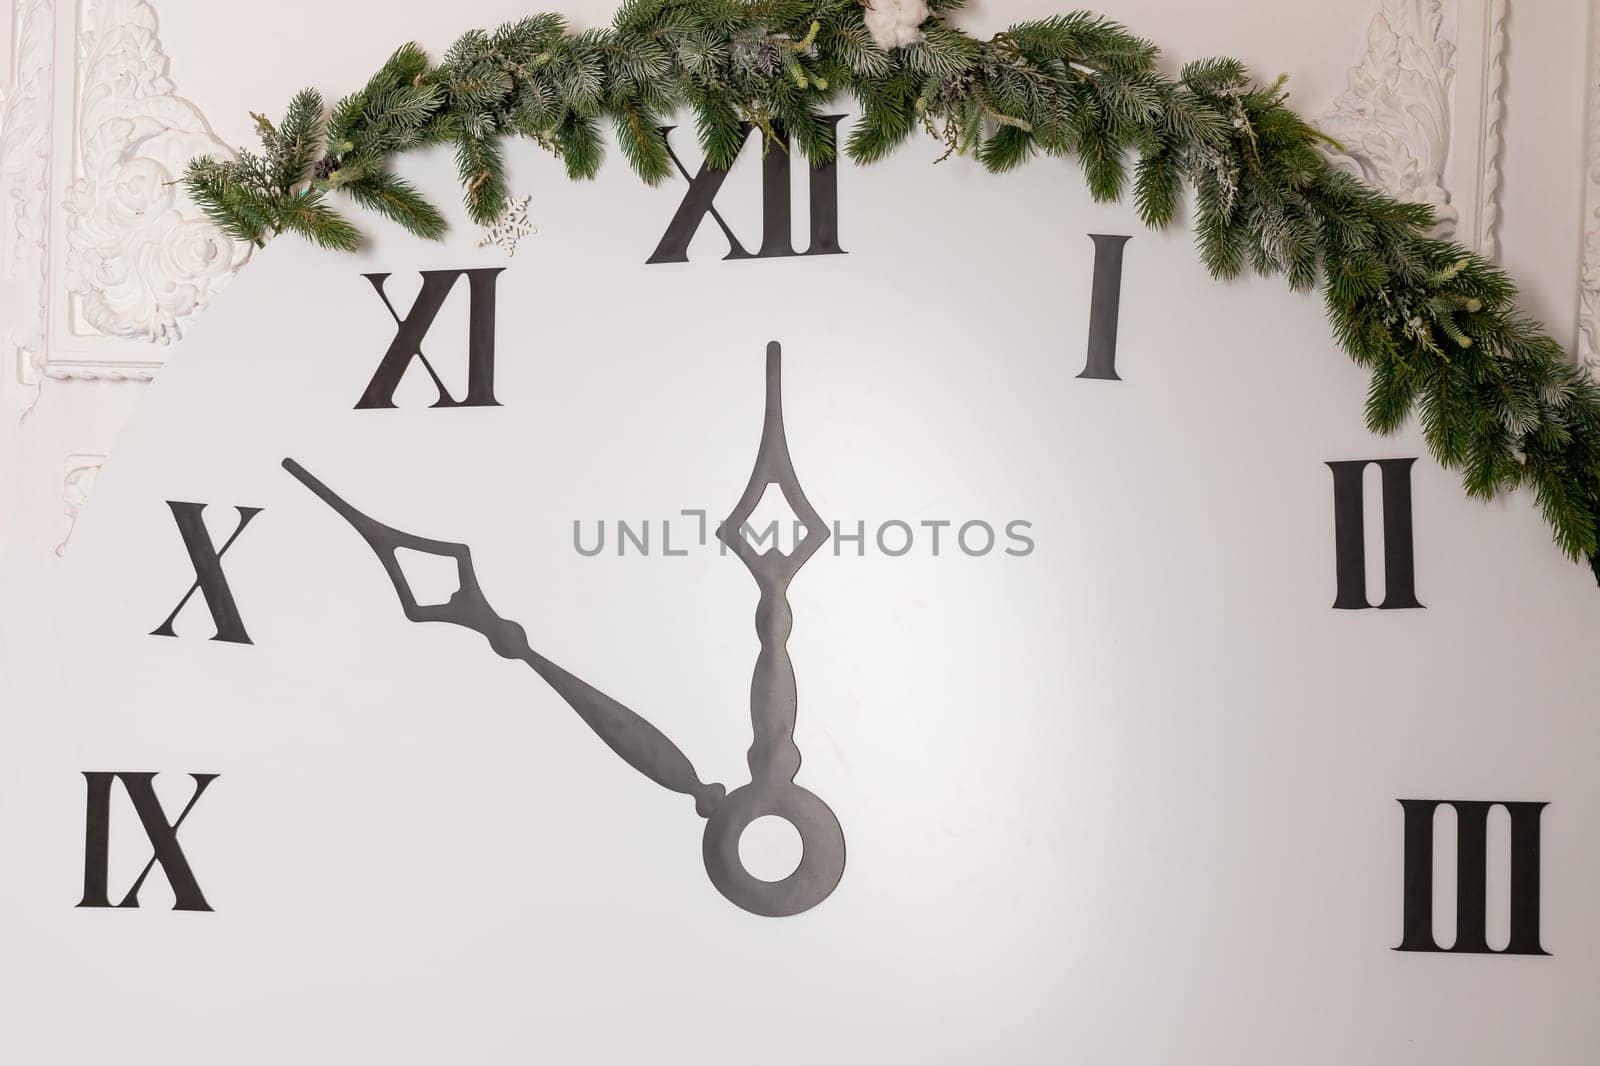 Layout clock. Dial with Roman numerals. Textured brown planks wood base. Black hands of the clock show the time - seven minutes to twelve. New Year holiday concept. by YuliaYaspe1979